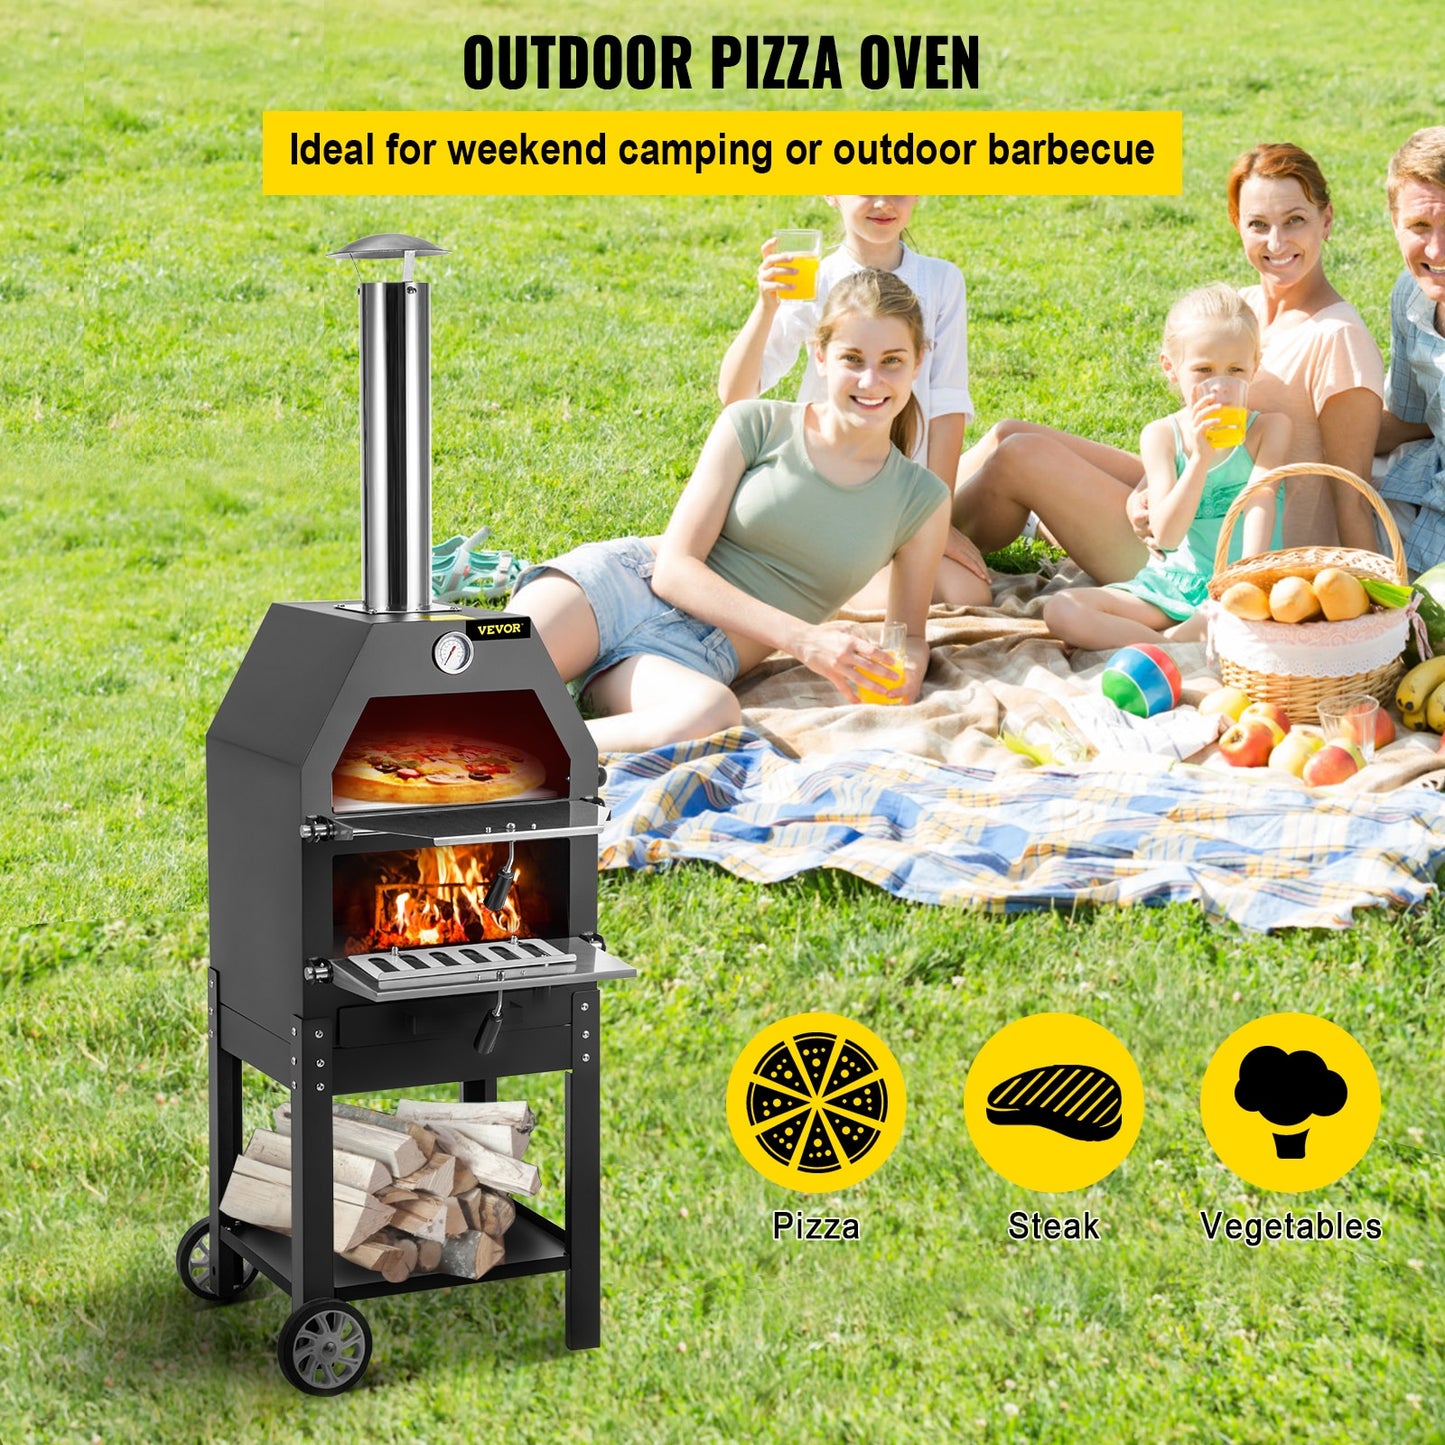 Wood Fried Pizza Oven with Wheels & Handle 2-Layer Portable for Backyard, Camping, Outdoor, Baking